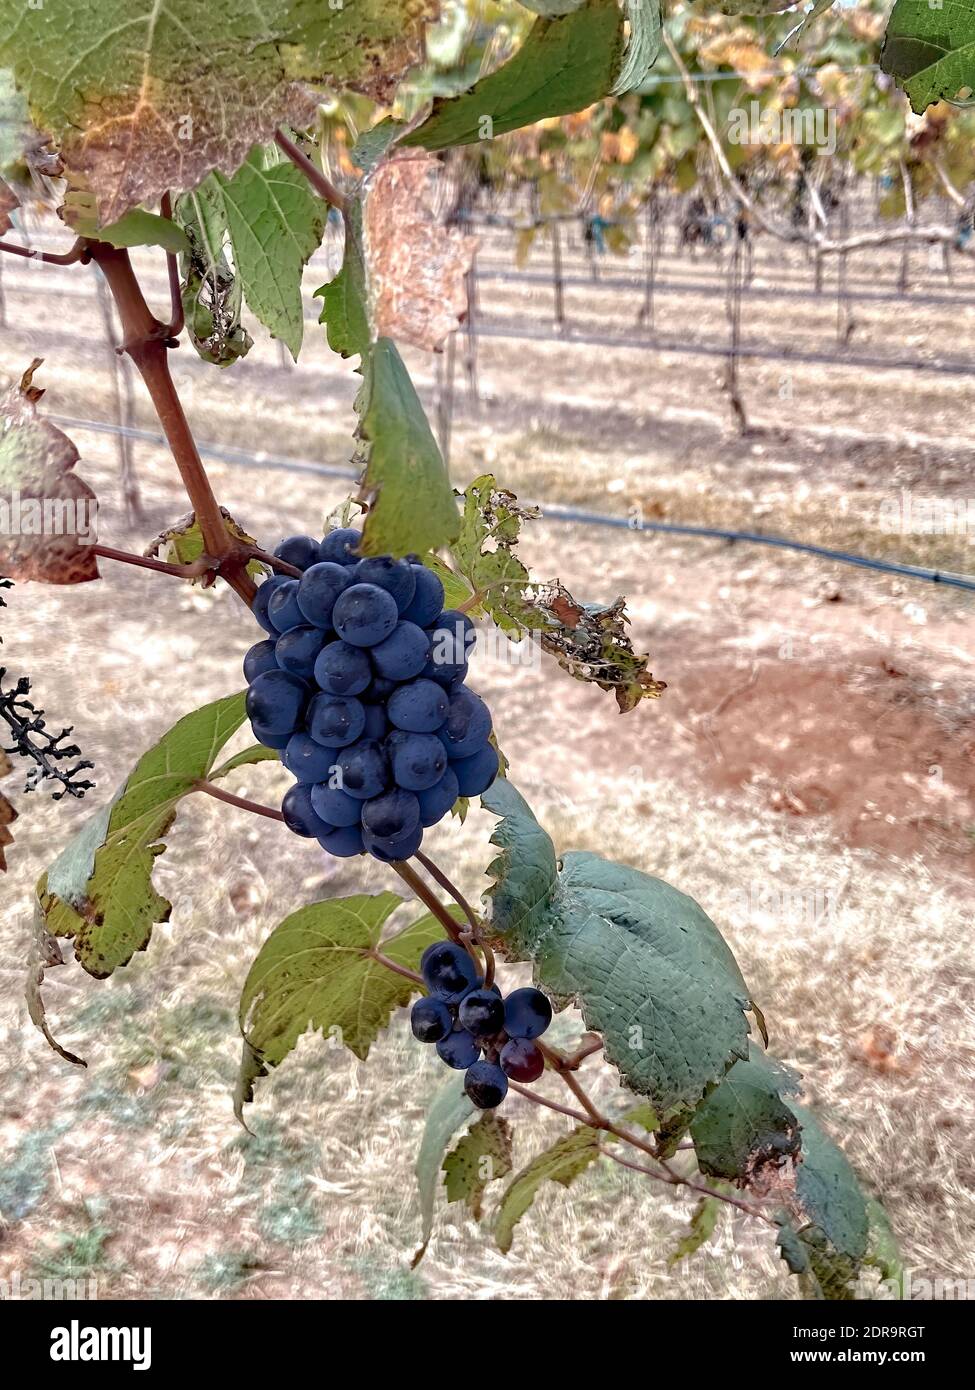 Grapes after the harvest in South texas. Stock Photo